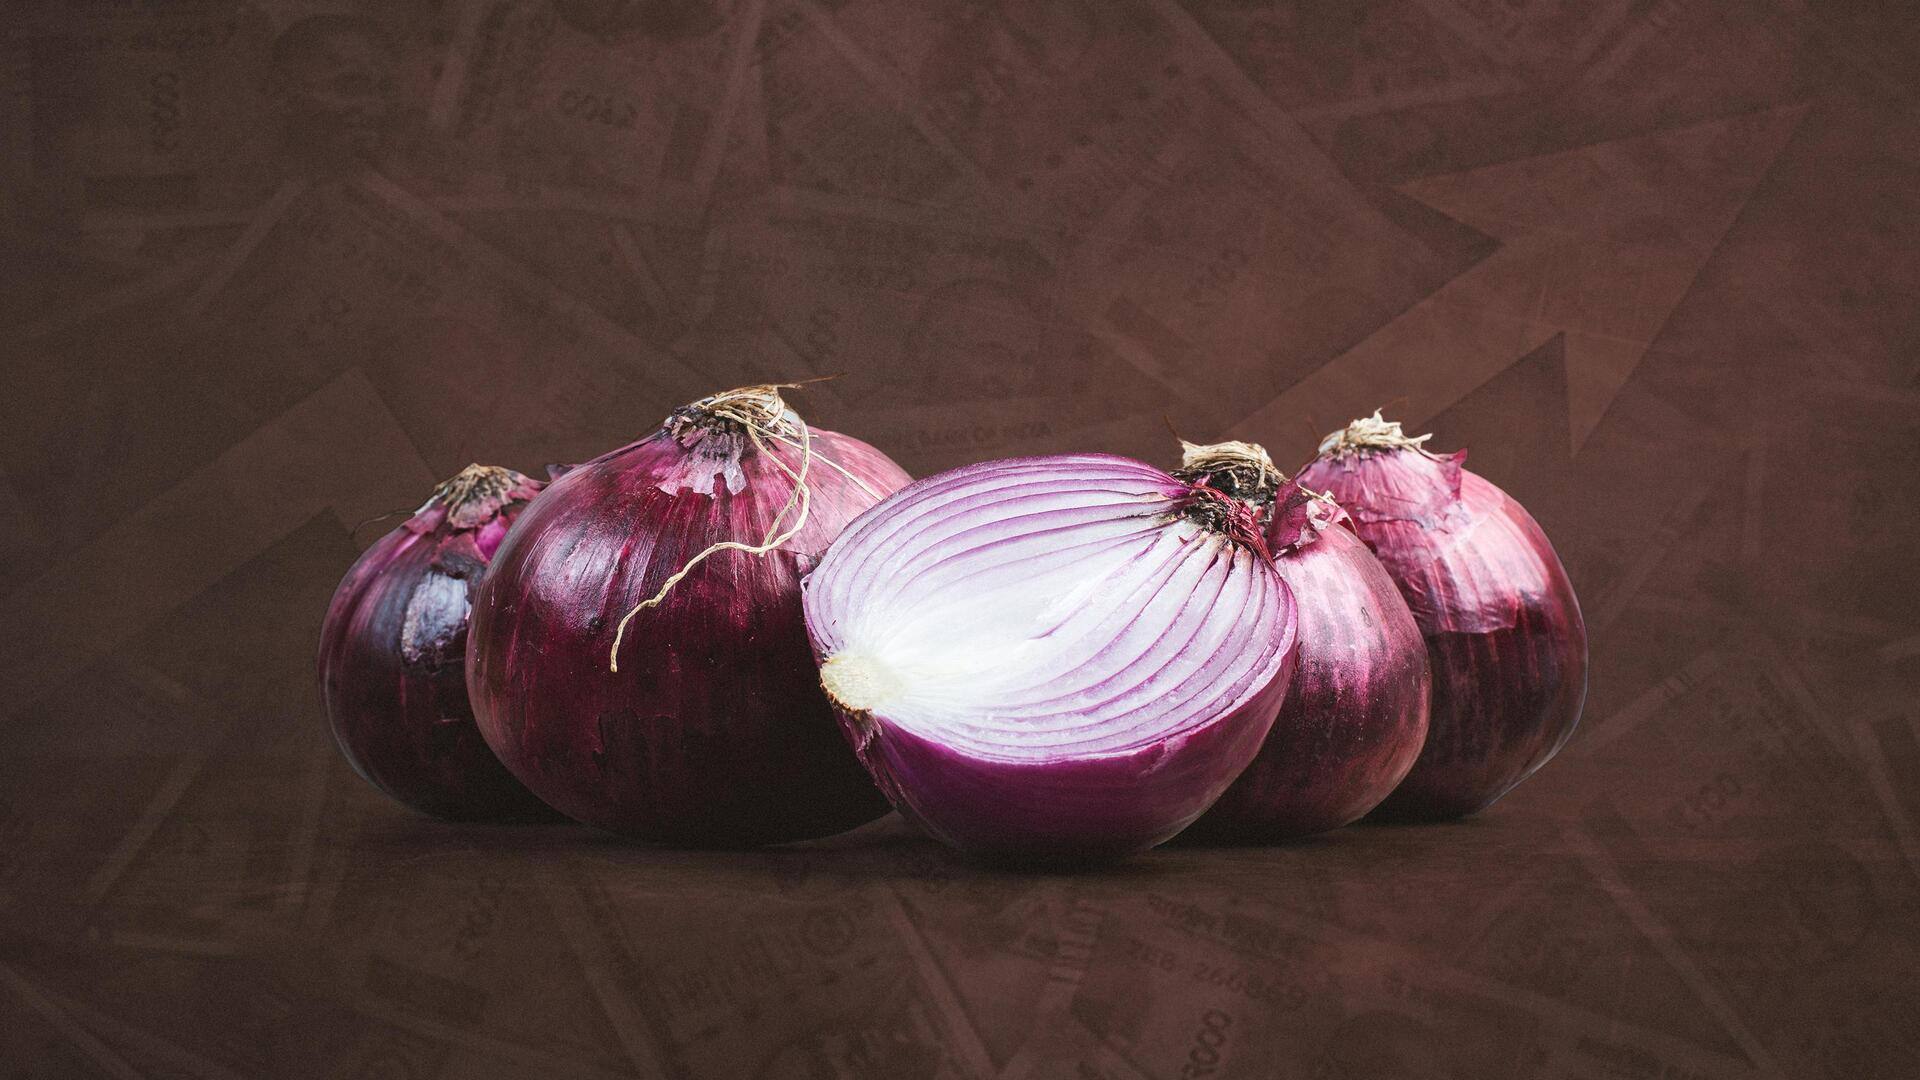 After tomato, onion prices likely to hurt pockets